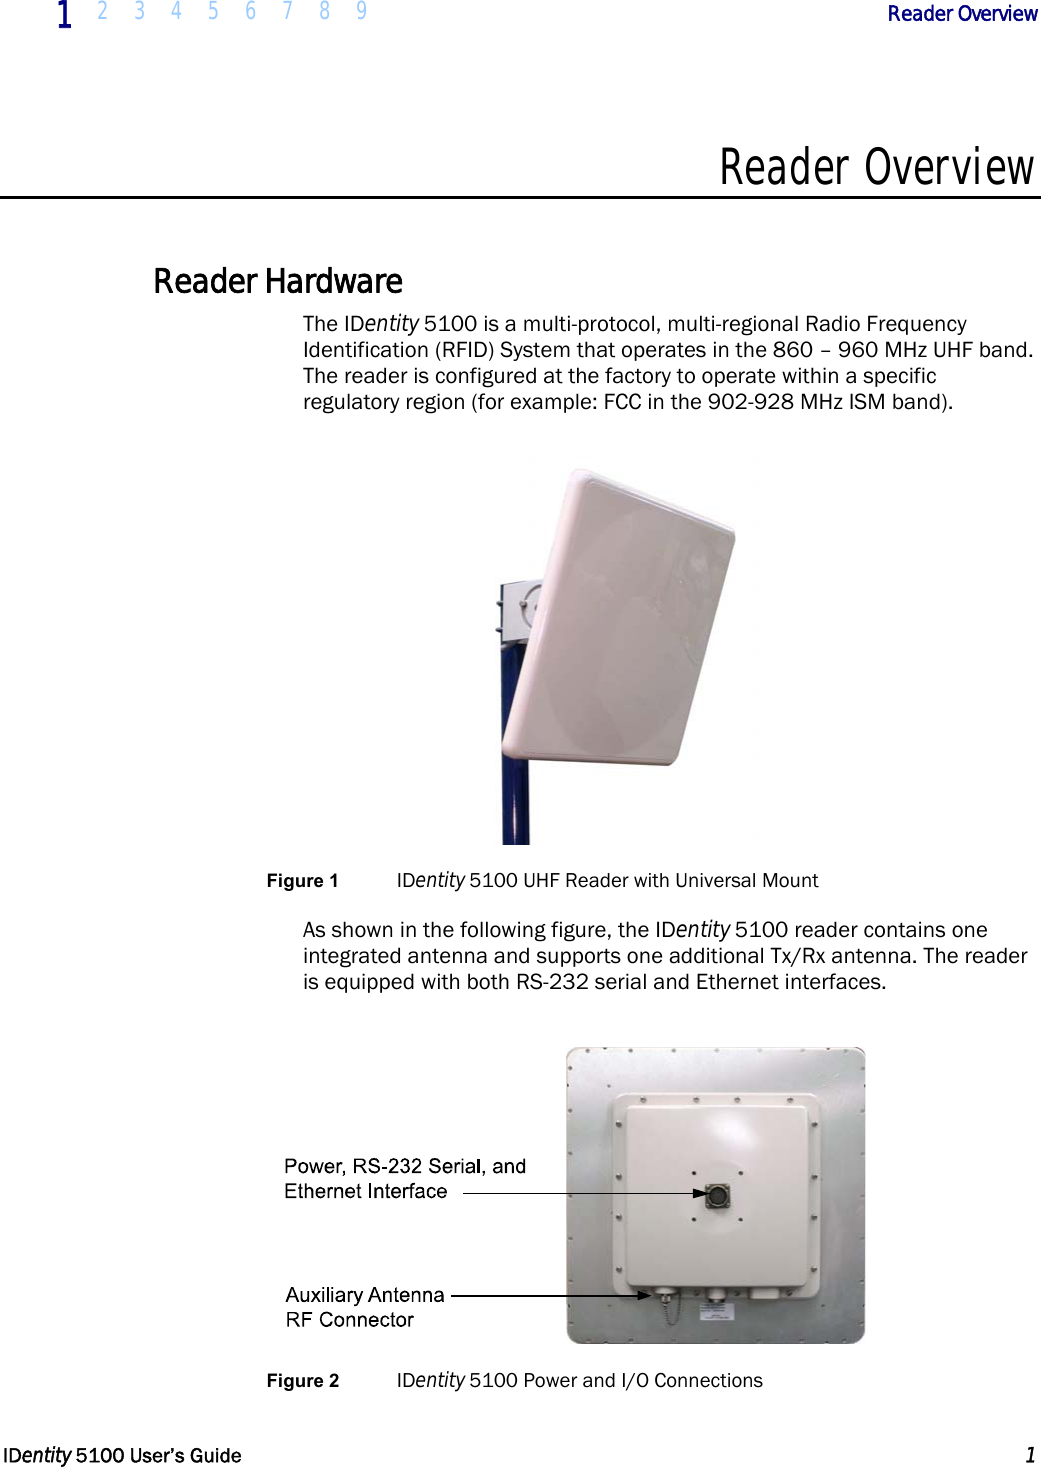  1 2 3 4 5 6 7 8 9            Reader Overview   IDentity 5100 User’s Guide  1  Reader Overview  Reader Hardware The IDentity 5100 is a multi-protocol, multi-regional Radio Frequency Identification (RFID) System that operates in the 860 – 960 MHz UHF band. The reader is configured at the factory to operate within a specific regulatory region (for example: FCC in the 902-928 MHz ISM band).  Figure 1 IDentity 5100 UHF Reader with Universal Mount As shown in the following figure, the IDentity 5100 reader contains one integrated antenna and supports one additional Tx/Rx antenna. The reader is equipped with both RS-232 serial and Ethernet interfaces.   Figure 2 IDentity 5100 Power and I/O Connections  